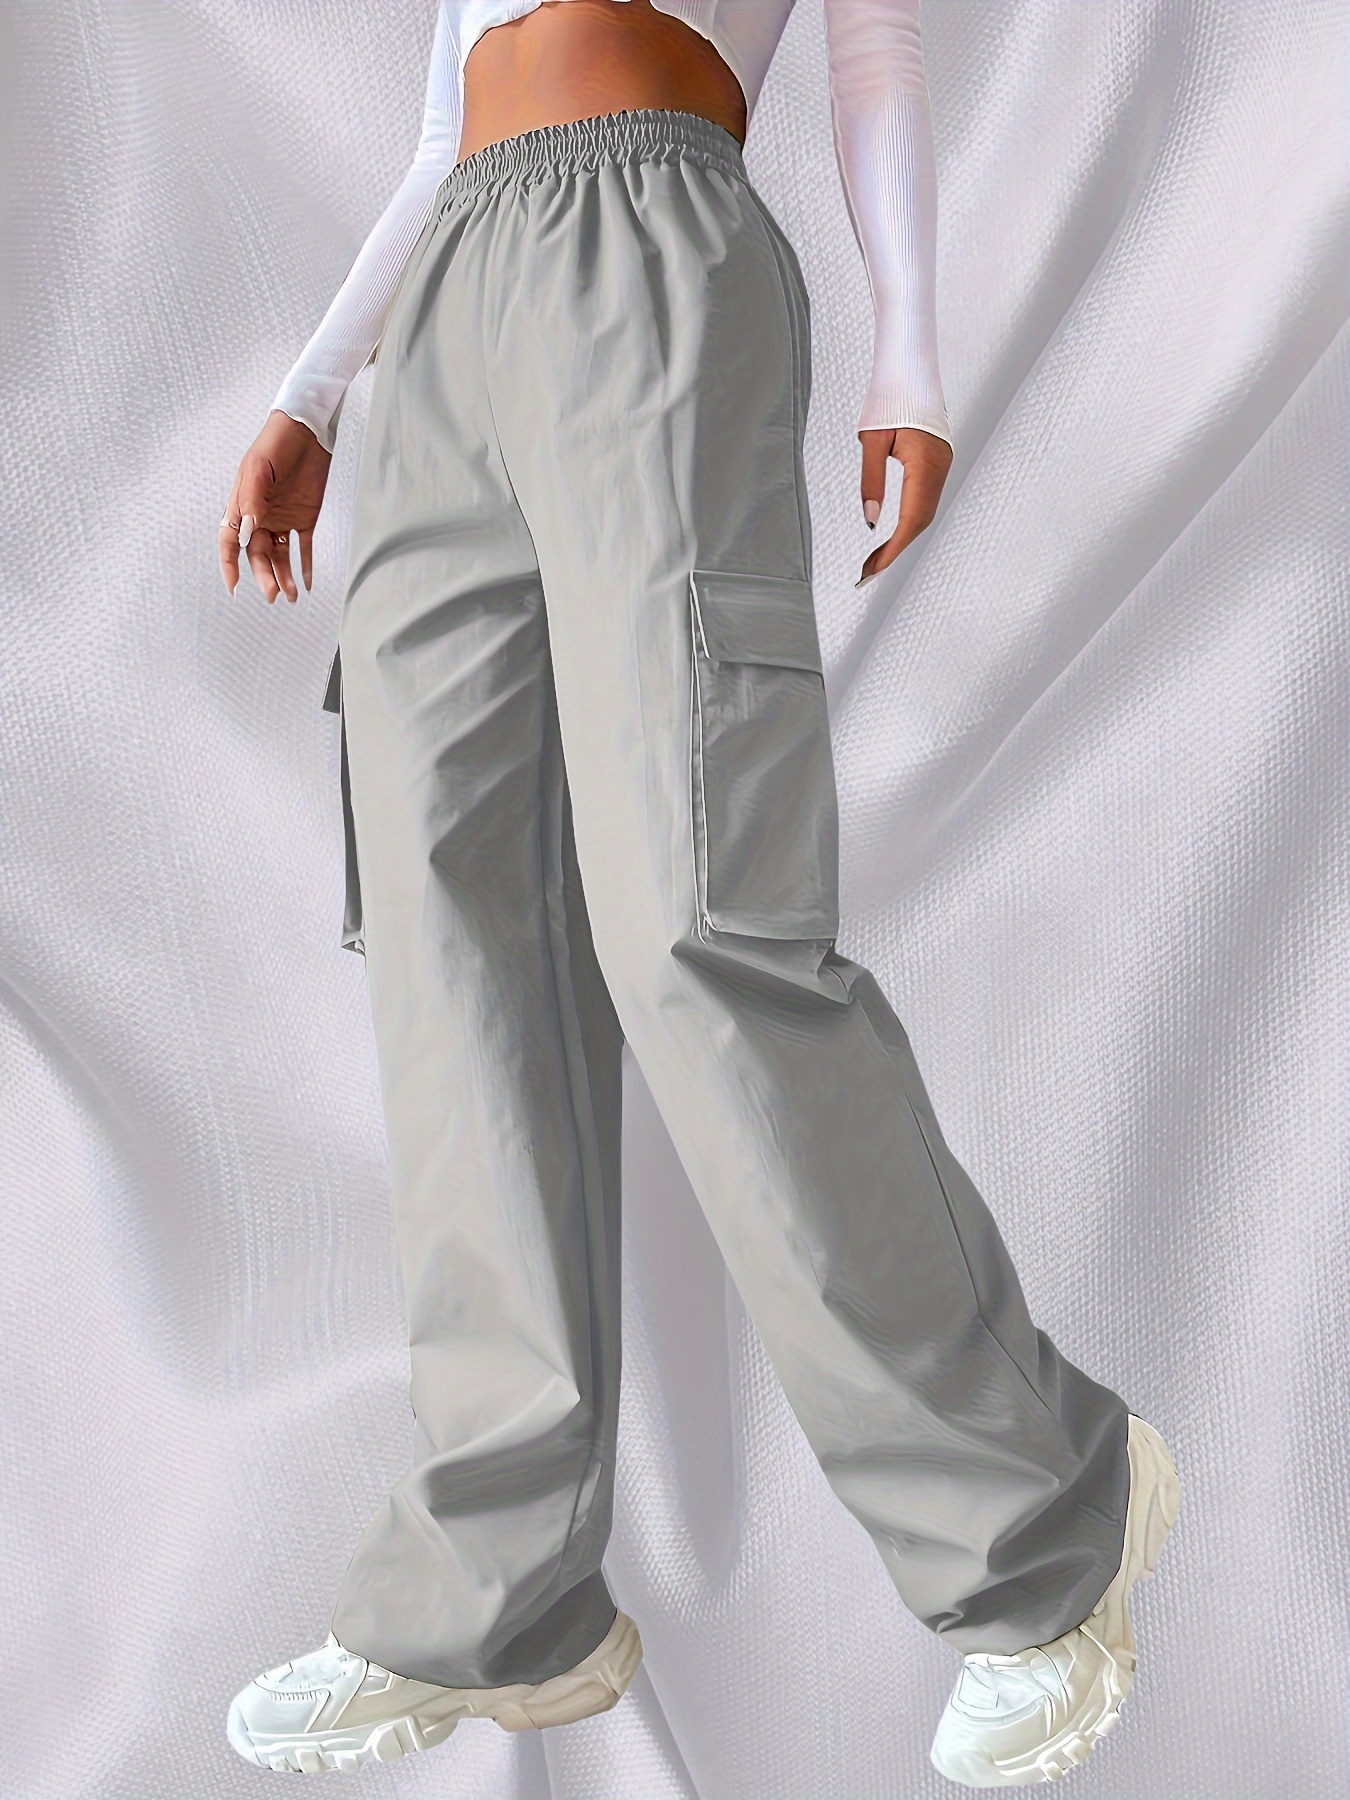 Womens Baggy Sweatpants Gray Joggers for Women Relaxed Fit pockets